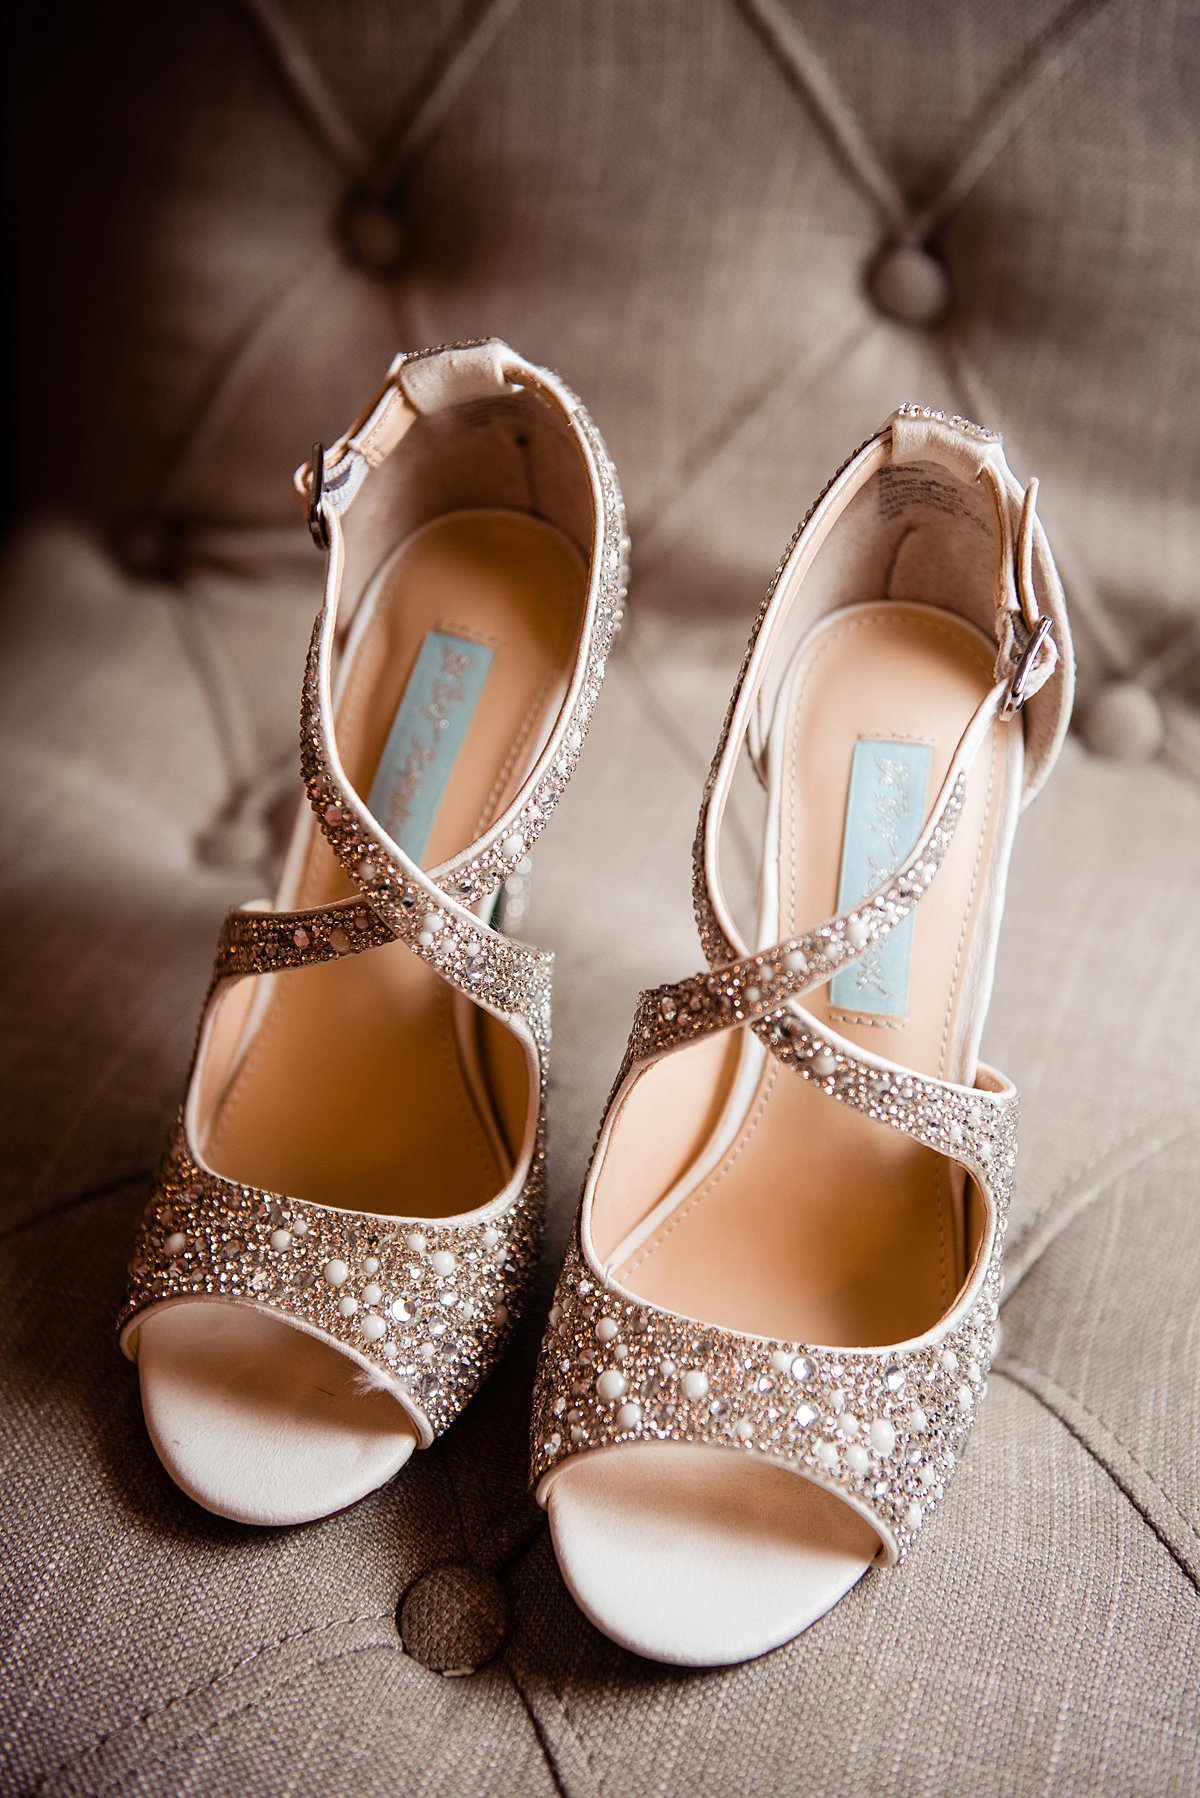 Brides wedding shoes with crystal and pearl detailing